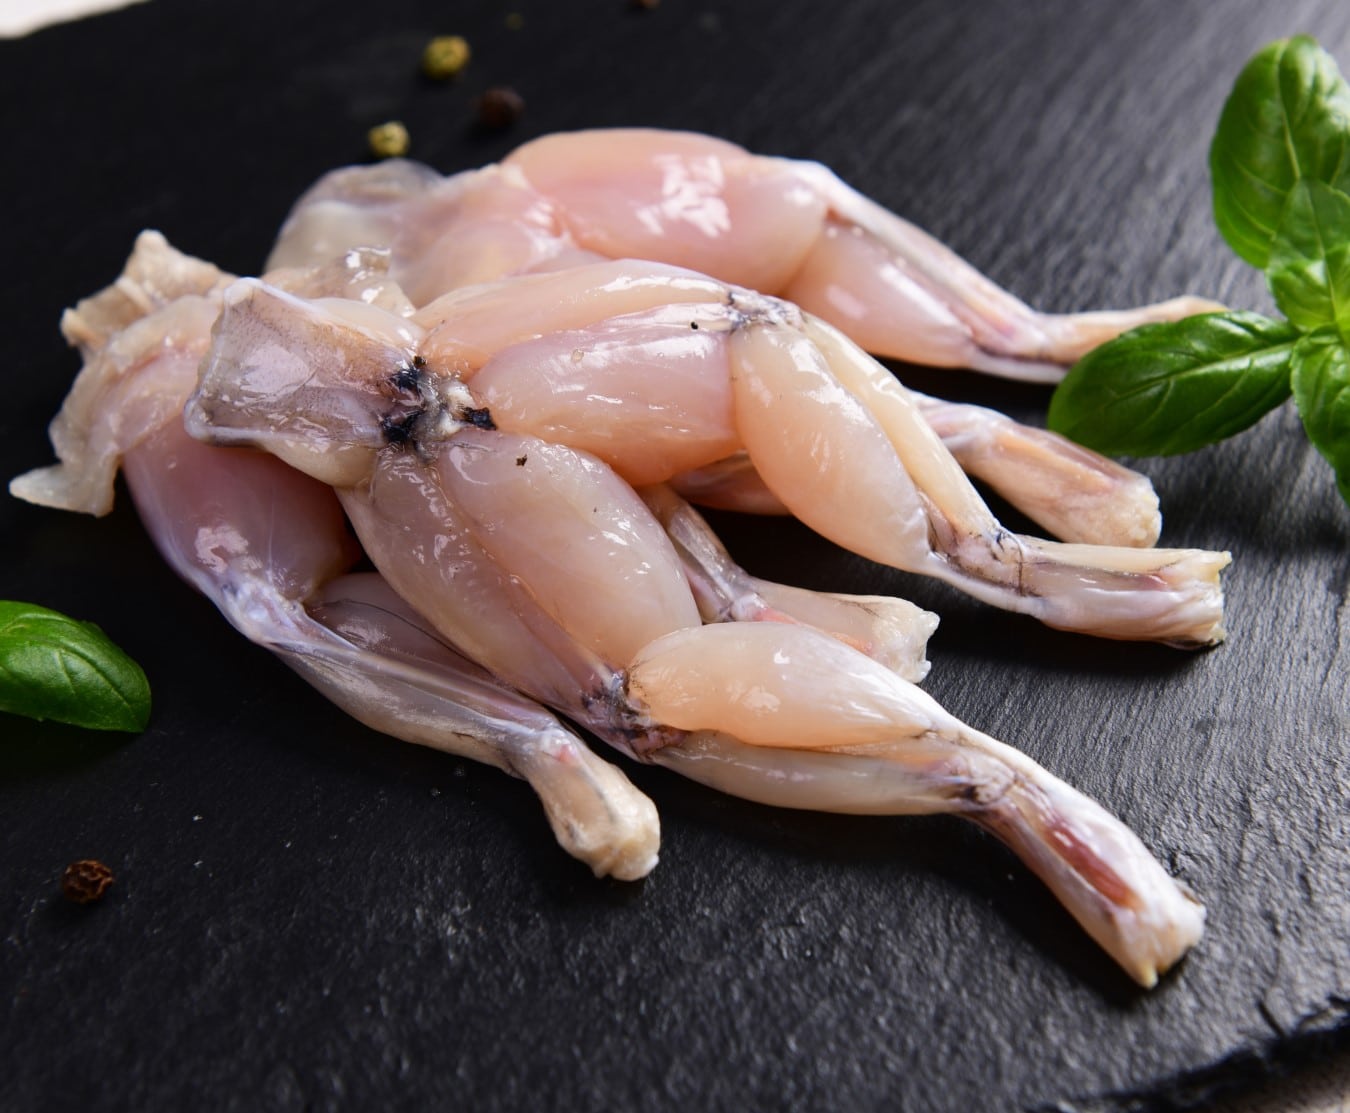 Buy Frogs Legs 800g net weight Online at the Best Price, Free UK Delivery -  Bradley's Fish